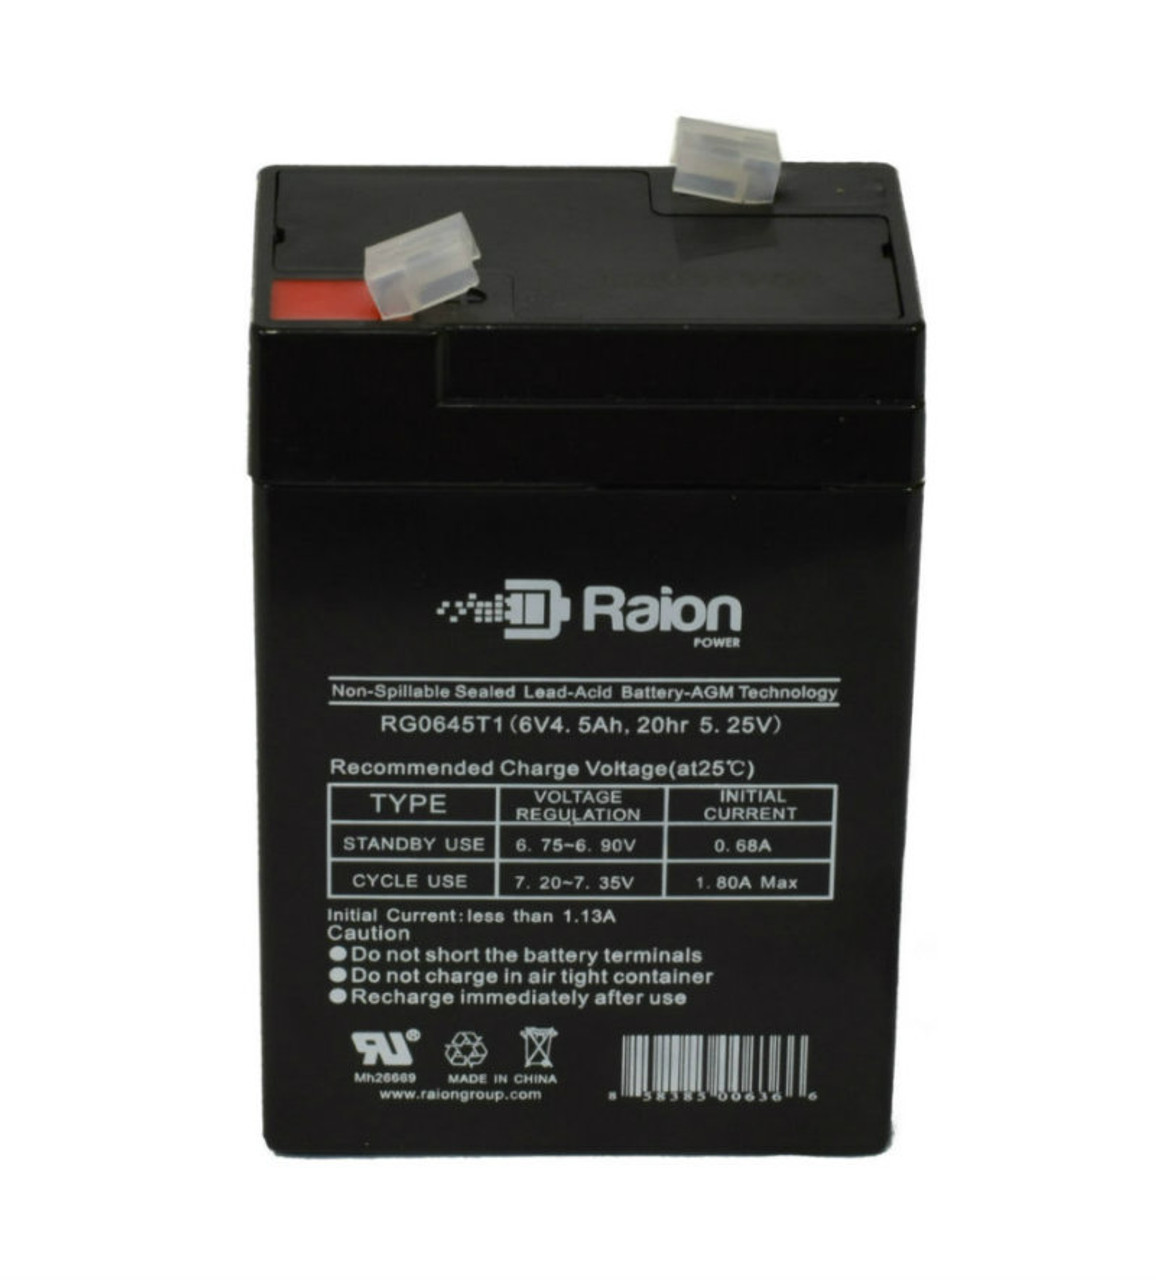 Raion Power RG0645T1 Replacement Battery Cartridge for Gruber Power GPS4.5-6